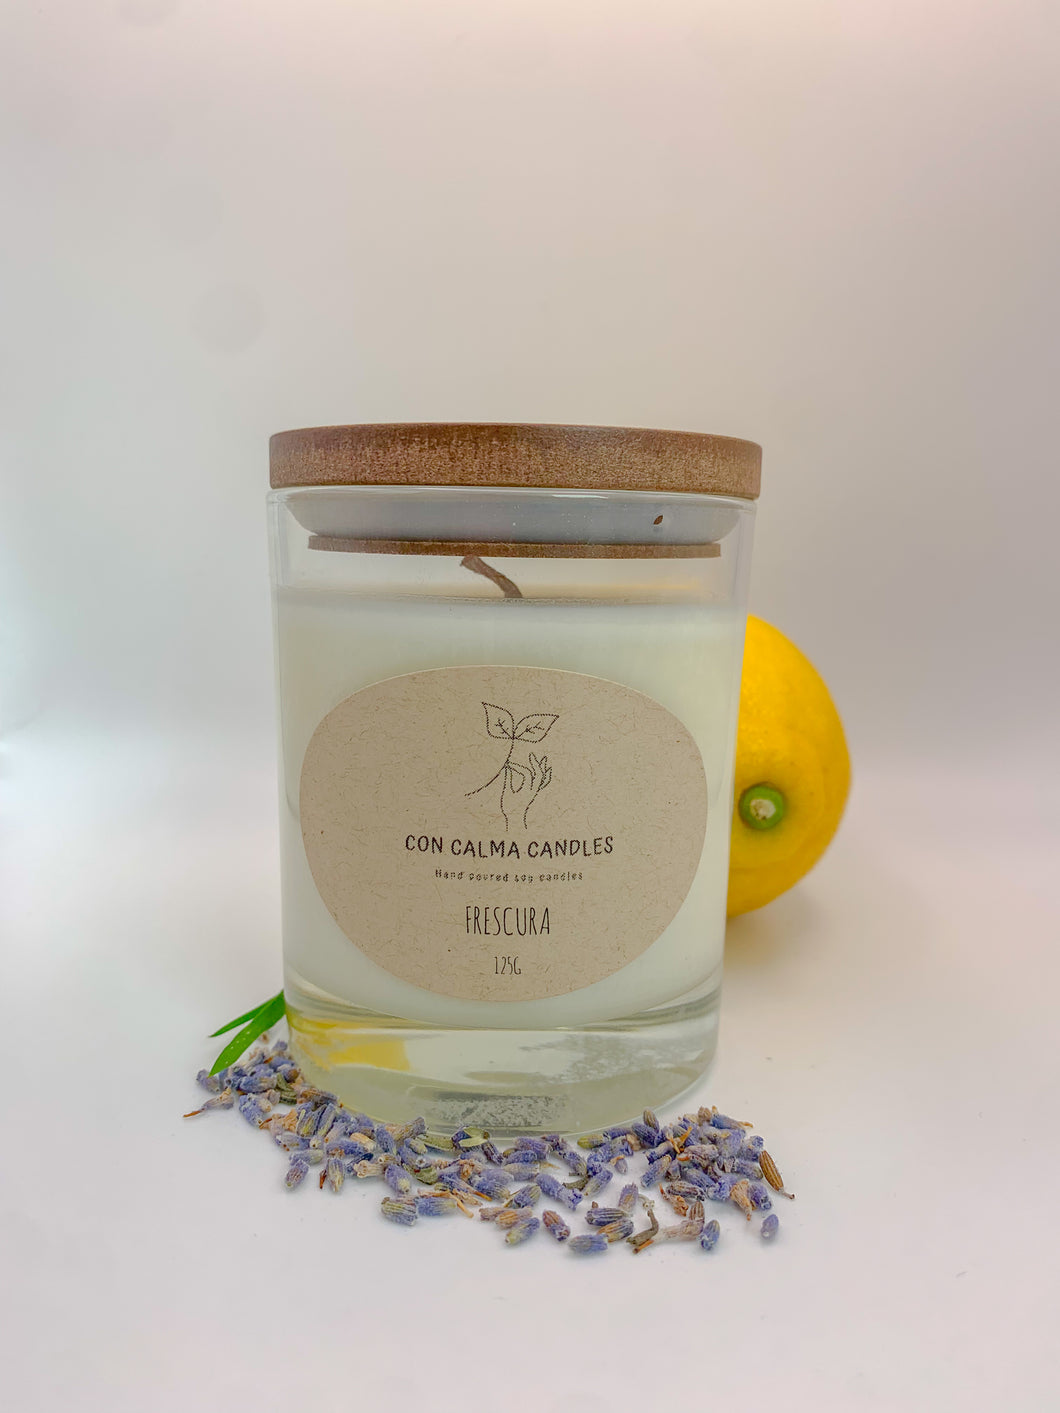 Frescura soy wax candle